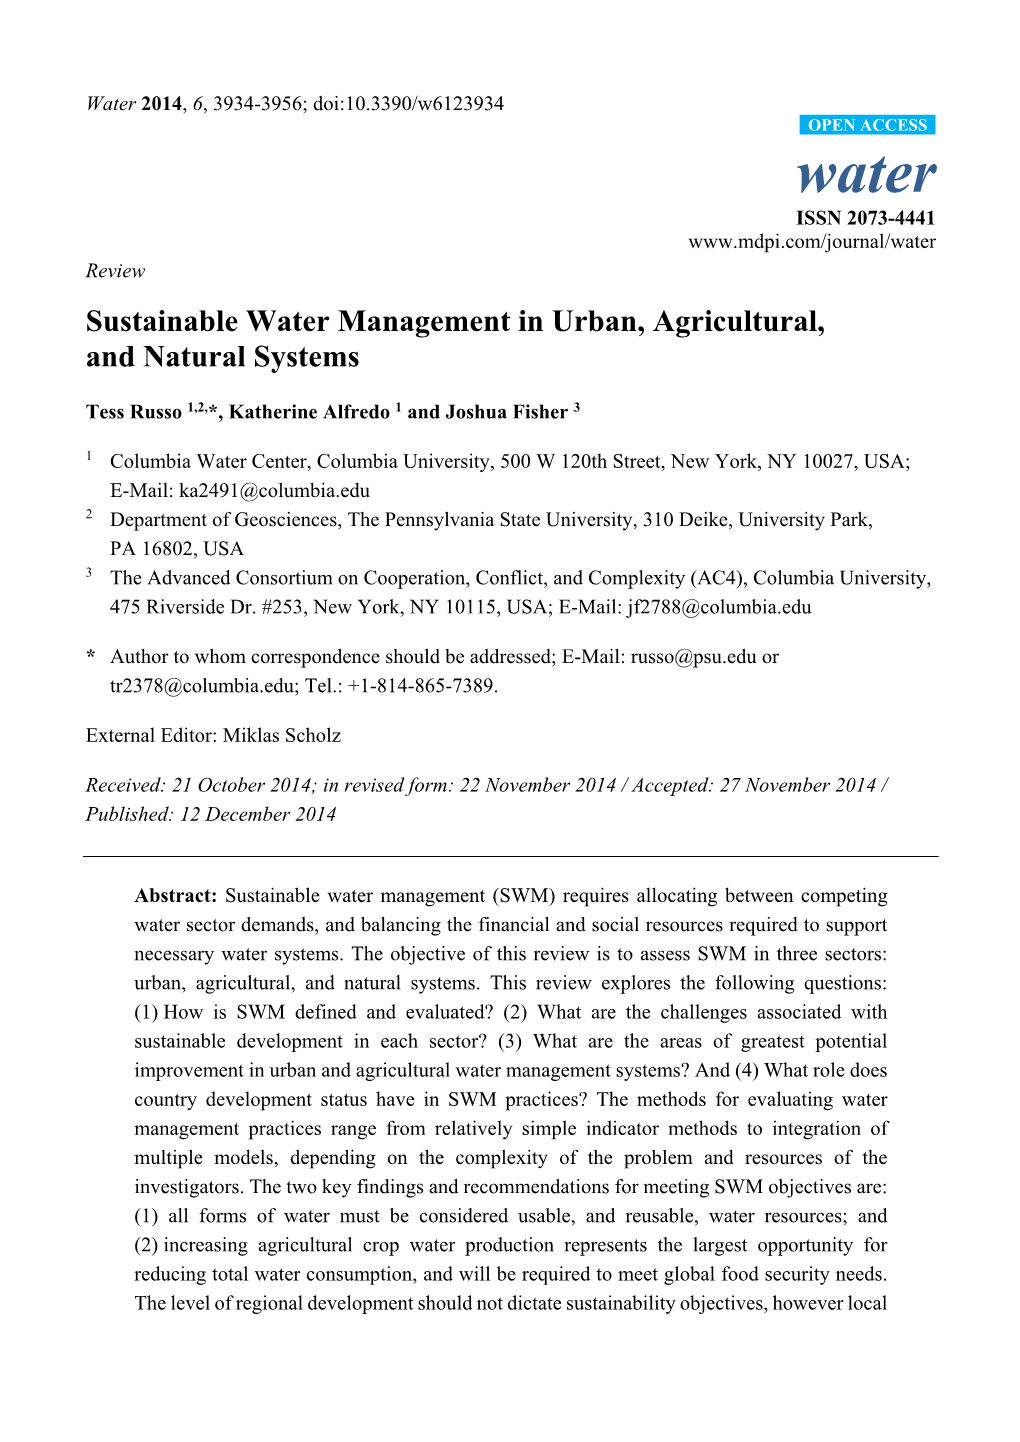 Sustainable Water Management in Urban, Agricultural, and Natural Systems